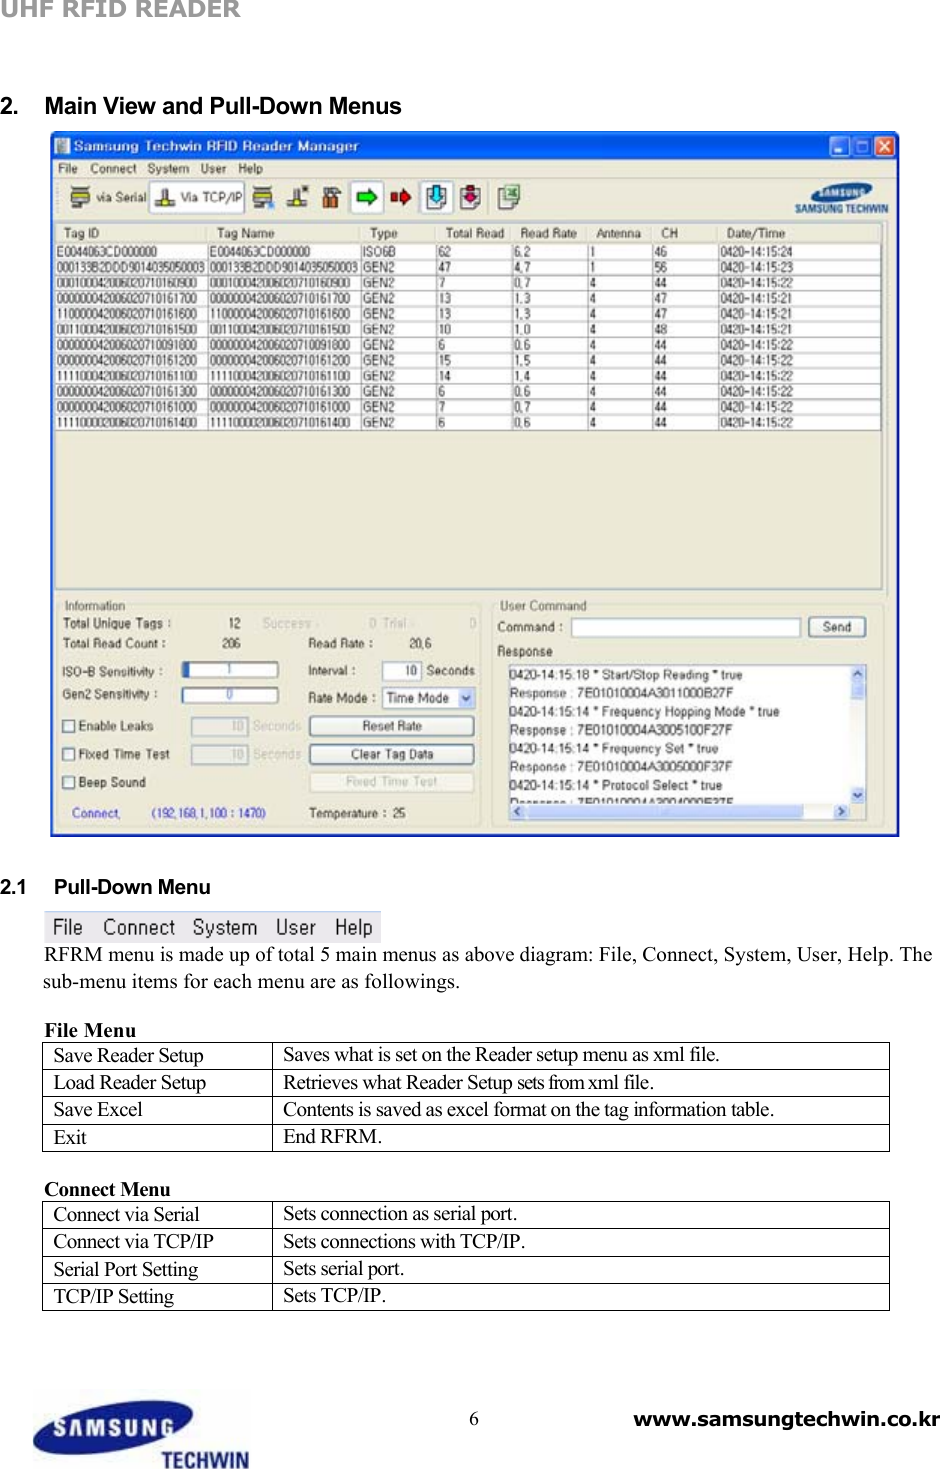 UHF RFID READER     2.  Main View and Pull-Down Menus     2.1   Pull-Down Menu   RFRM menu is made up of total 5 main menus as above diagram: File, Connect, System, User, Help. The sub-menu items for each menu are as followings.    File Menu Save Reader Setup Saves what is set on the Reader setup menu as xml file.  Load Reader Setup Retrieves what Reader Setup sets from xml file.   Save Excel Contents is saved as excel format on the tag information table.  Exit End RFRM.    Connect Menu Connect via Serial Sets connection as serial port.   Connect via TCP/IP Sets connections with TCP/IP.  Serial Port Setting Sets serial port.  TCP/IP Setting Sets TCP/IP.       6 www.samsungtechwin.co.kr 